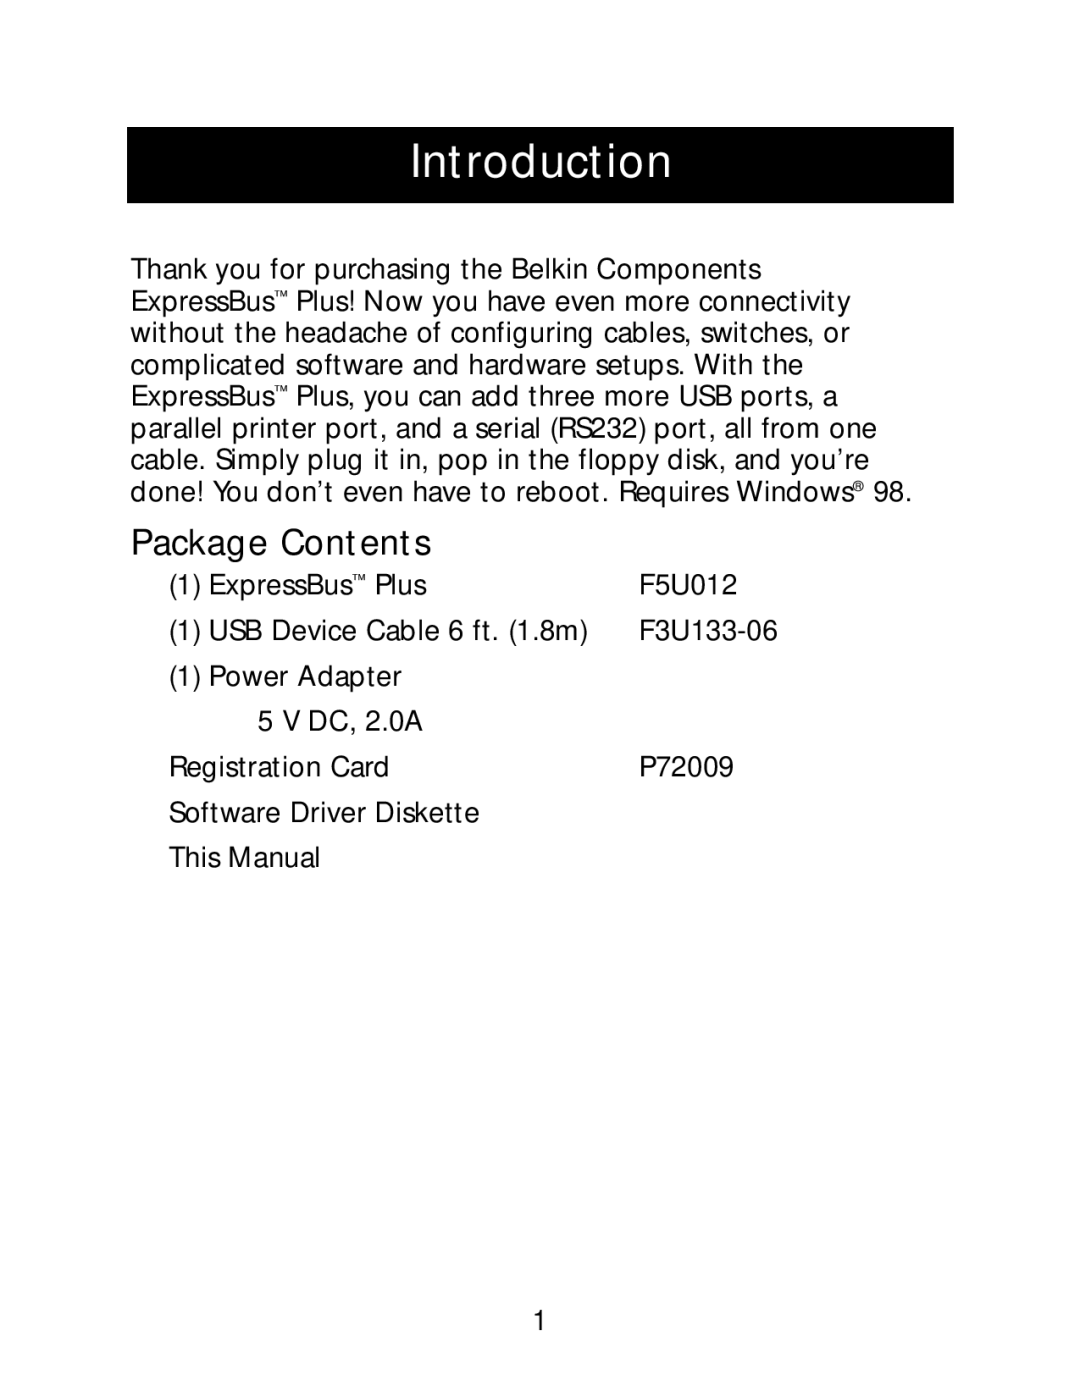 Belkin P73213-A user manual Introduction, Package Contents 